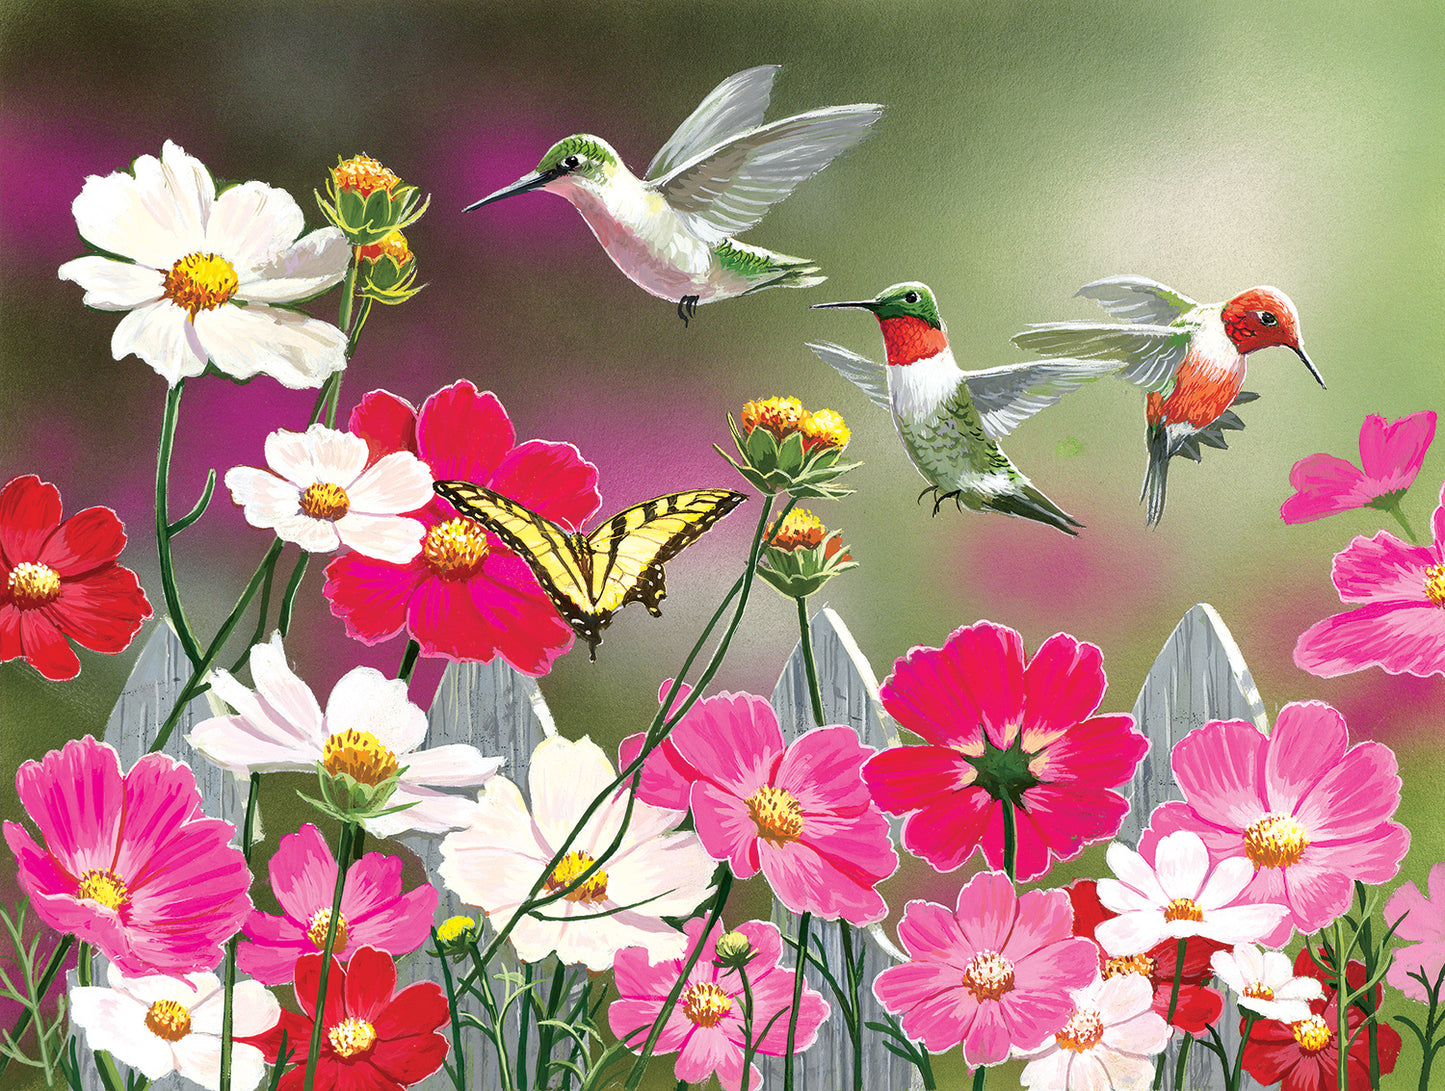 Cosmos and Hummingbirds - 500 Piece Jigsaw Puzzle